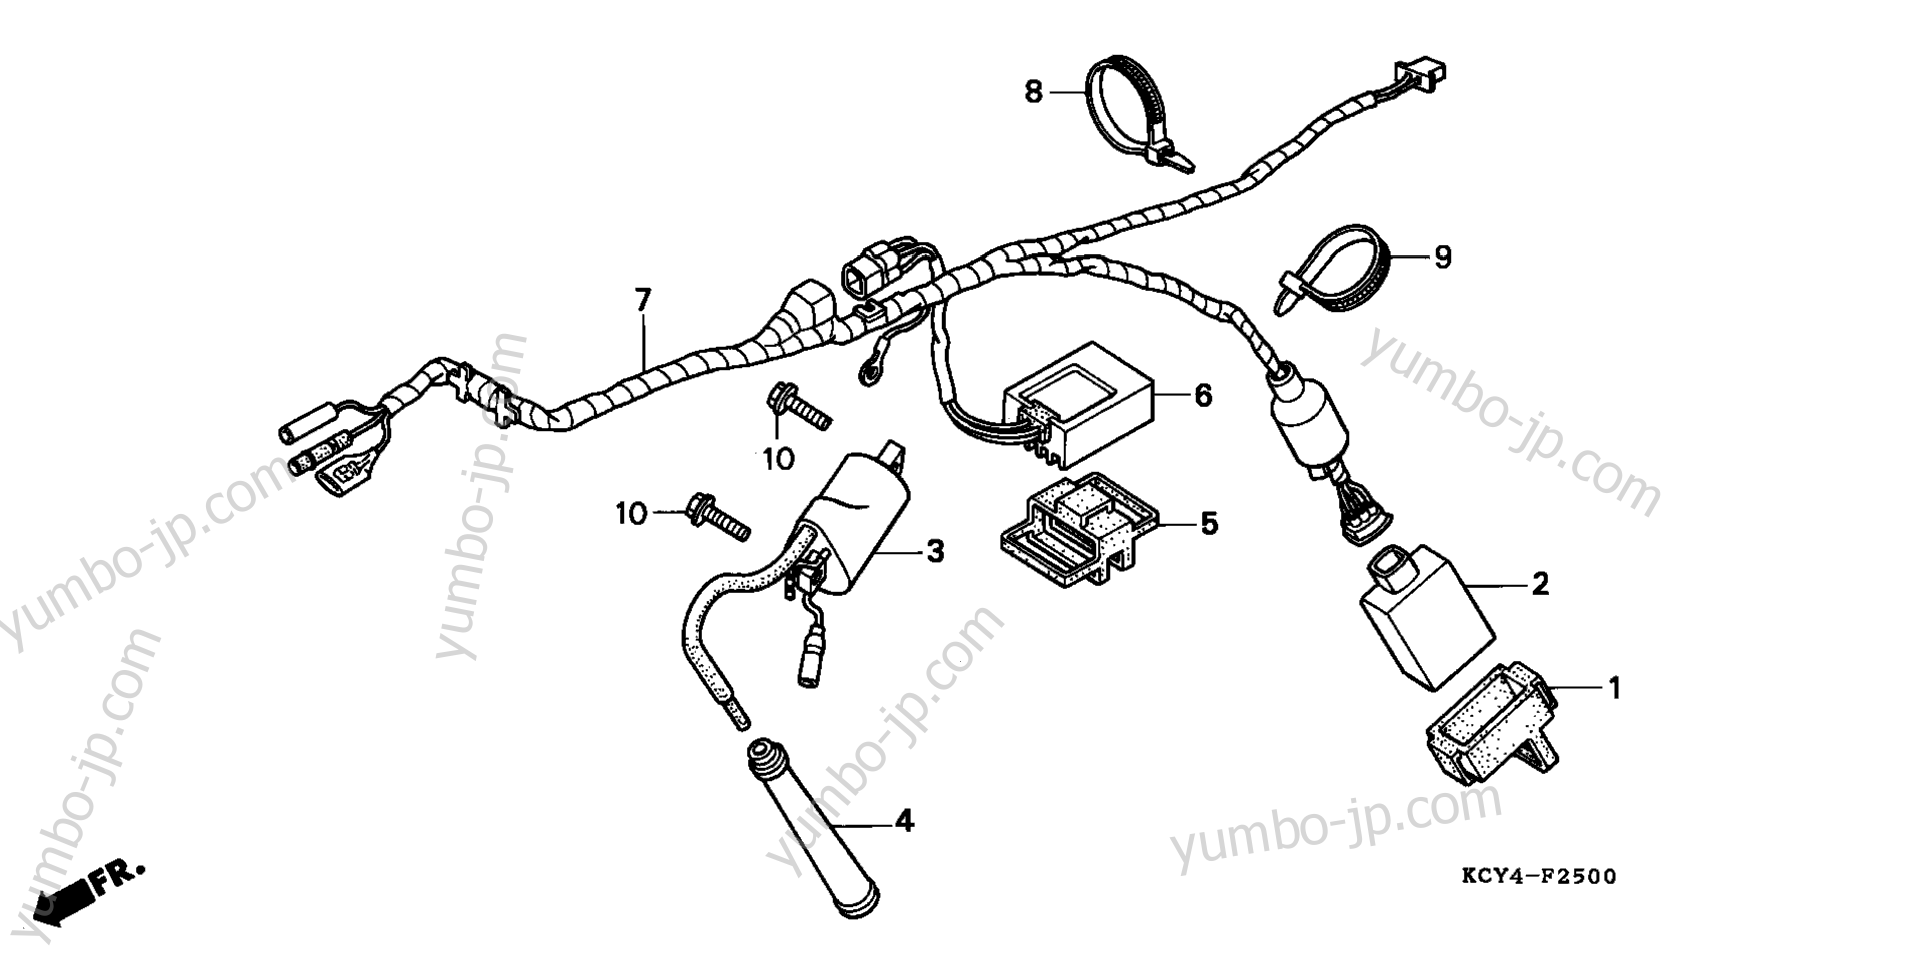 WIRE HARNESS for motorcycles HONDA XR400R A/A 2003 year